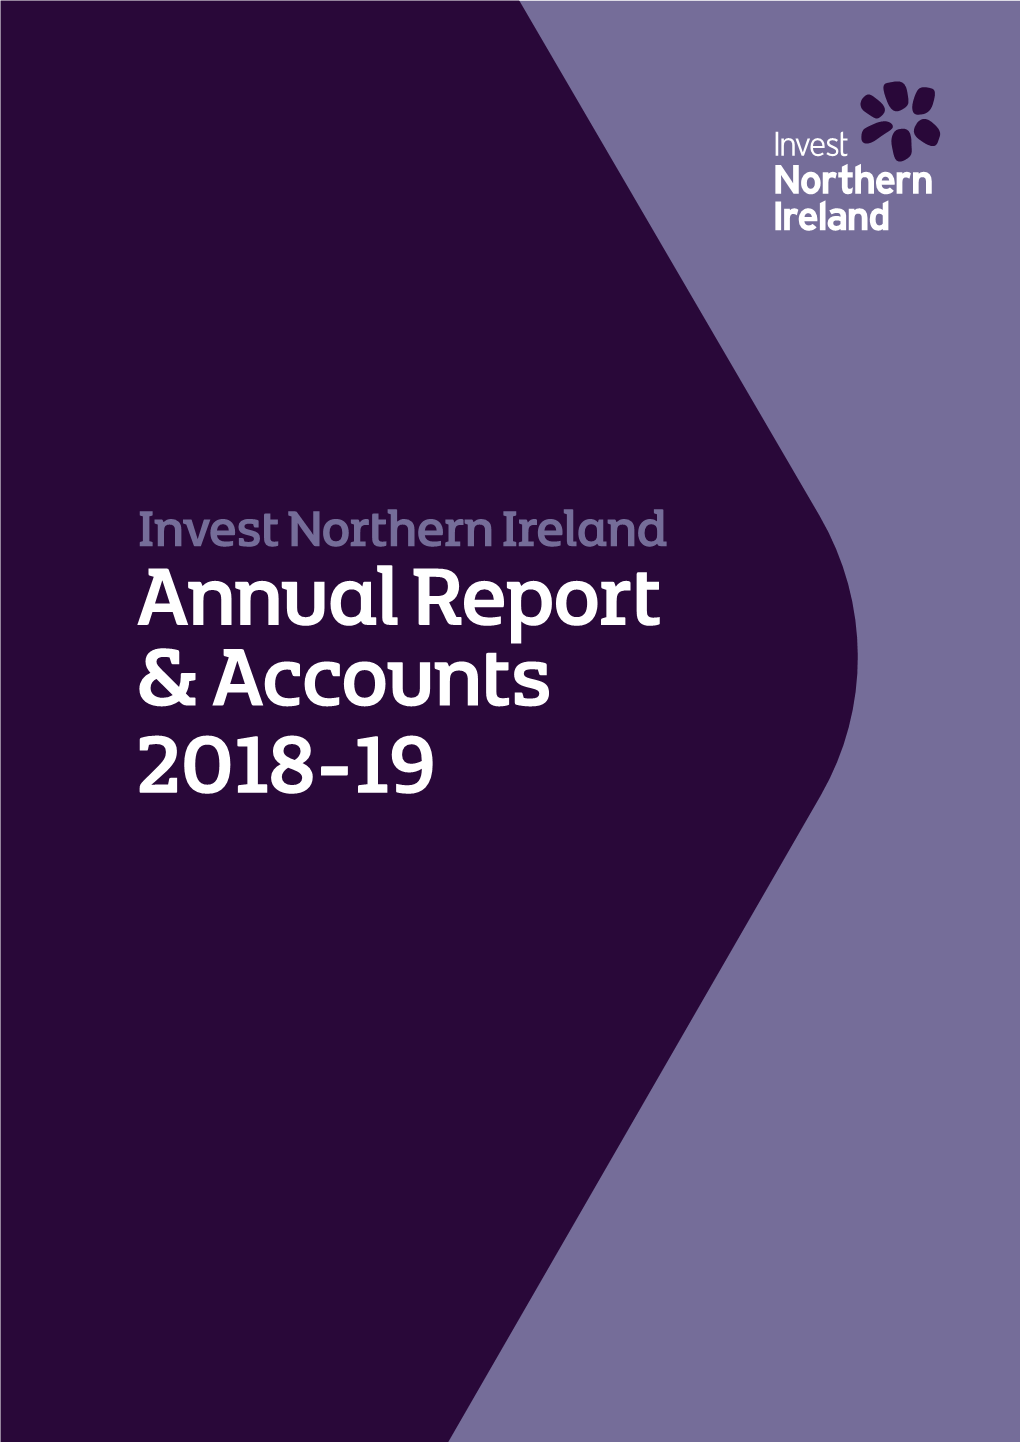 Invest Northern Ireland Annual Report & Accounts 2018-19 INVEST NORTHERN IRELAND ANNUAL REPORT and ACCOUNTS for the YEAR ENDED 31 MARCH 2019